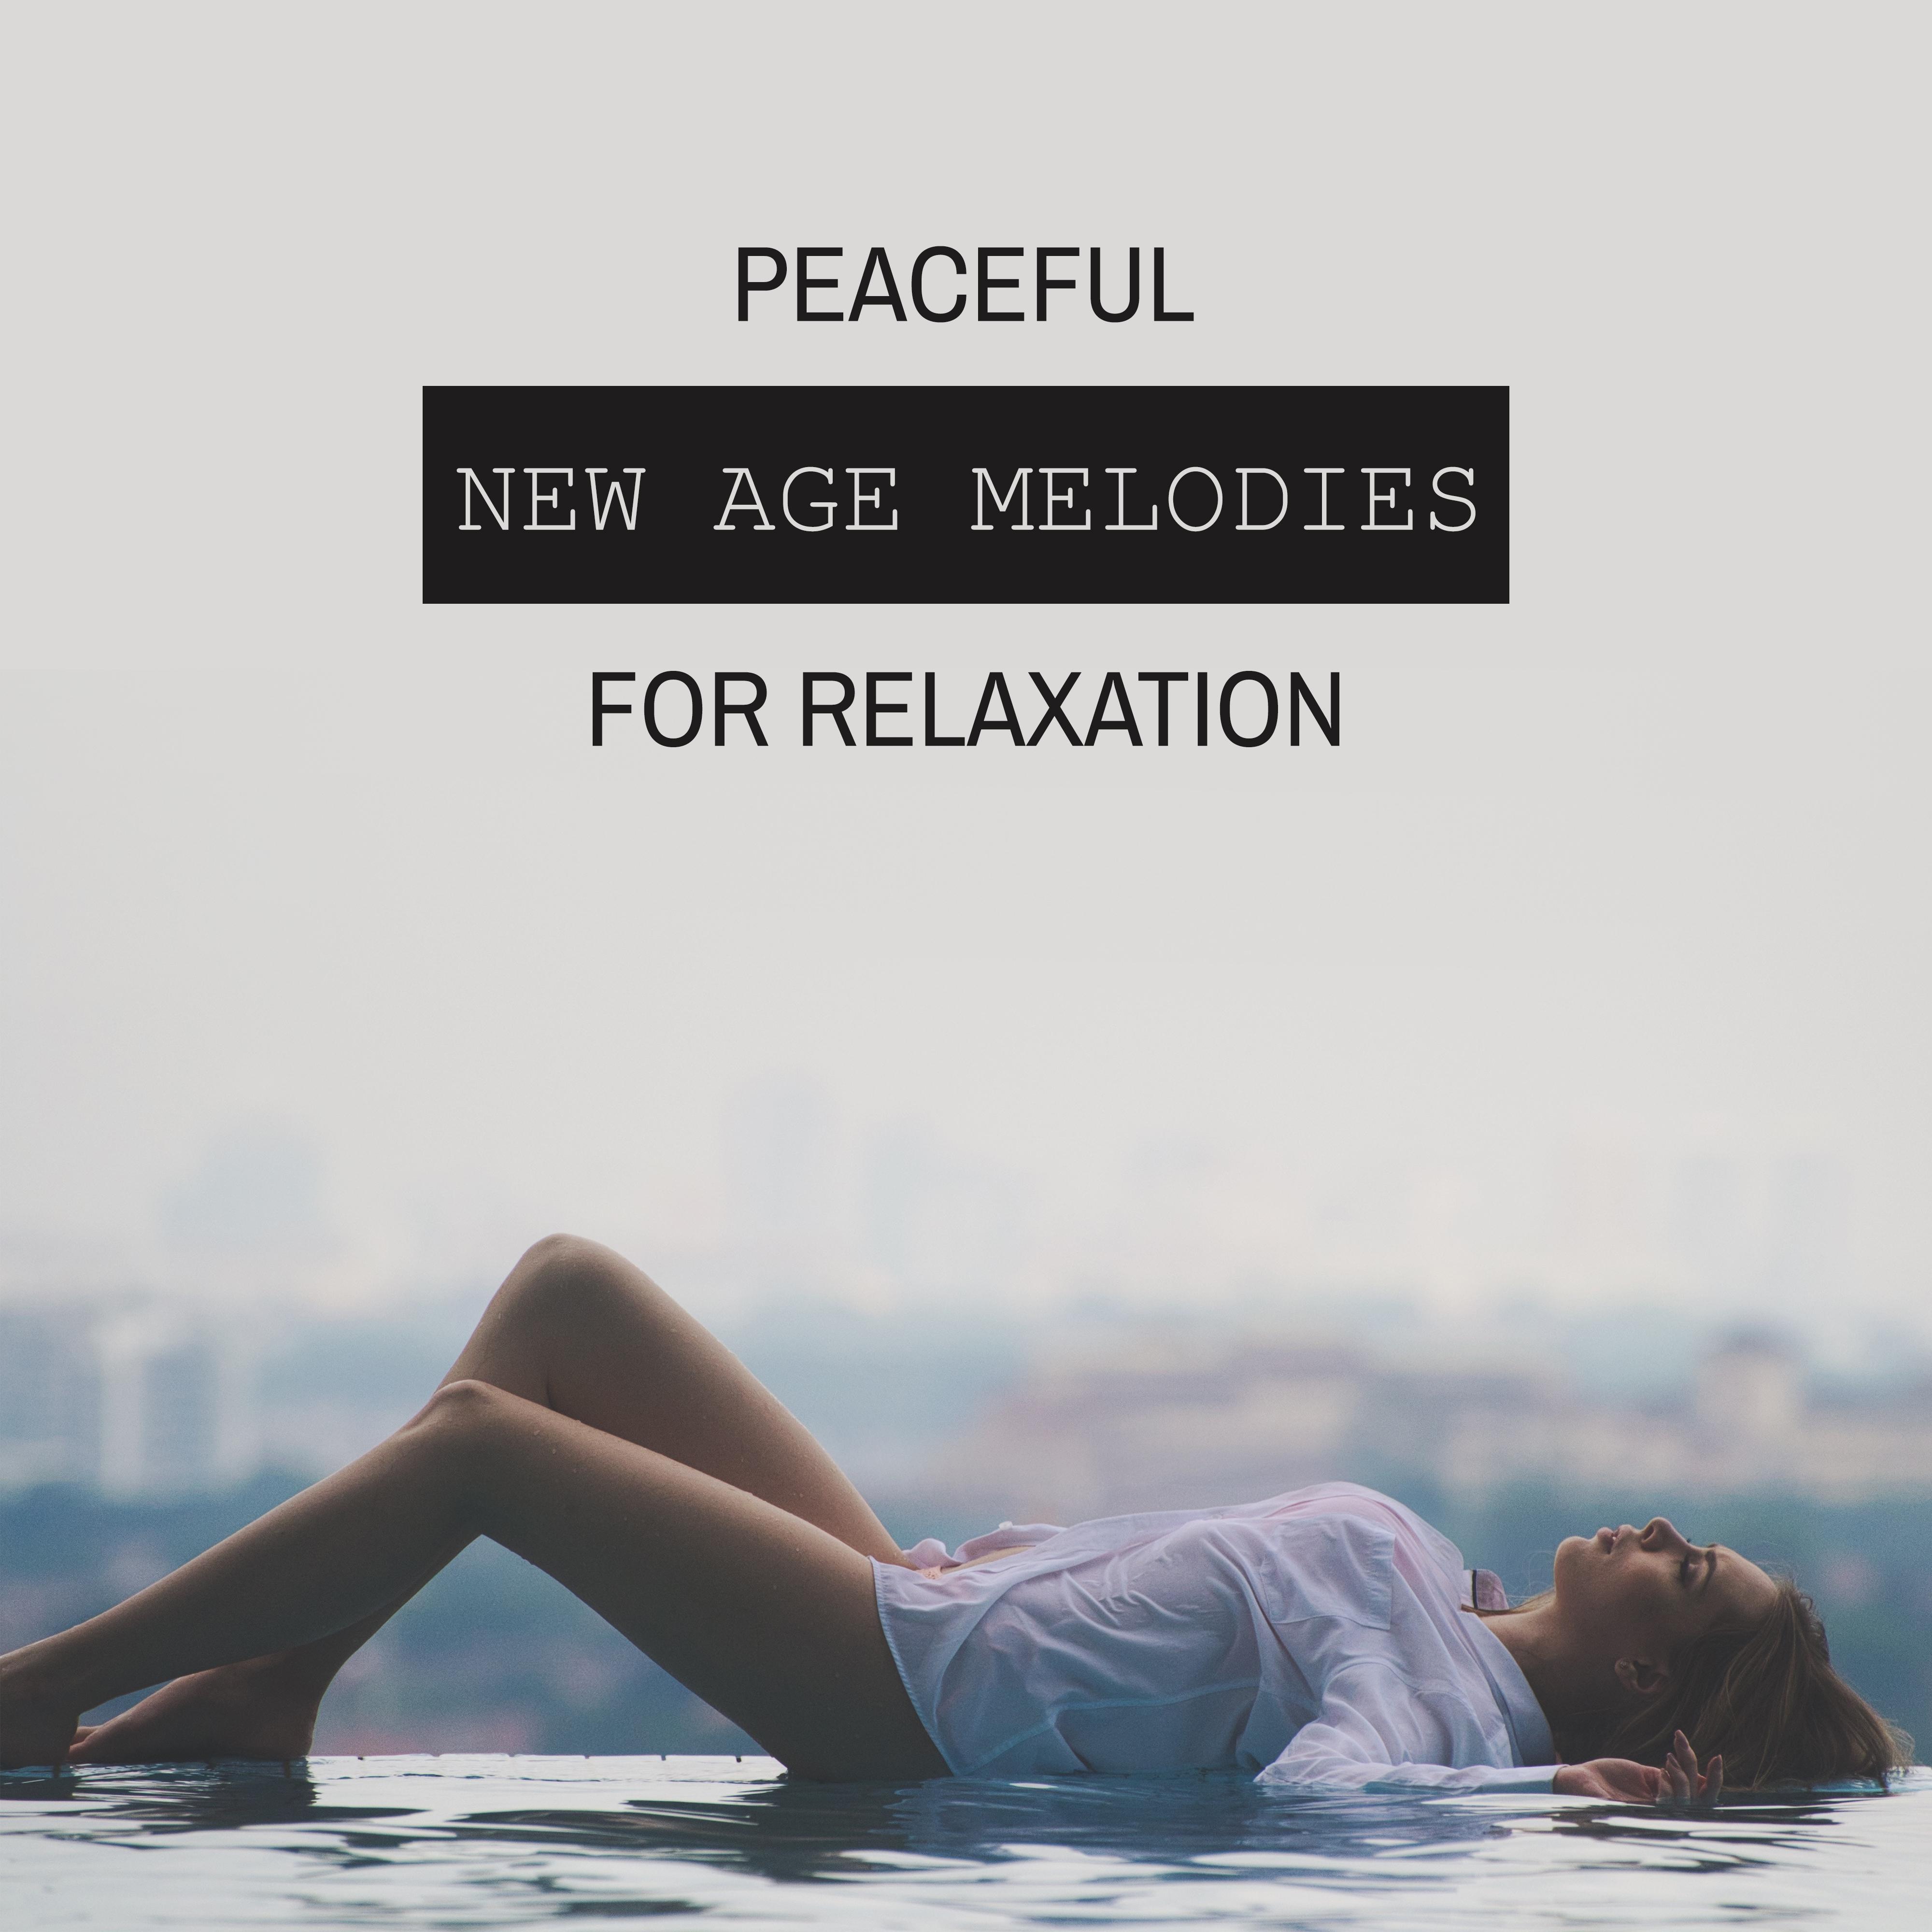 Peaceful New Age Melodies for Relaxation